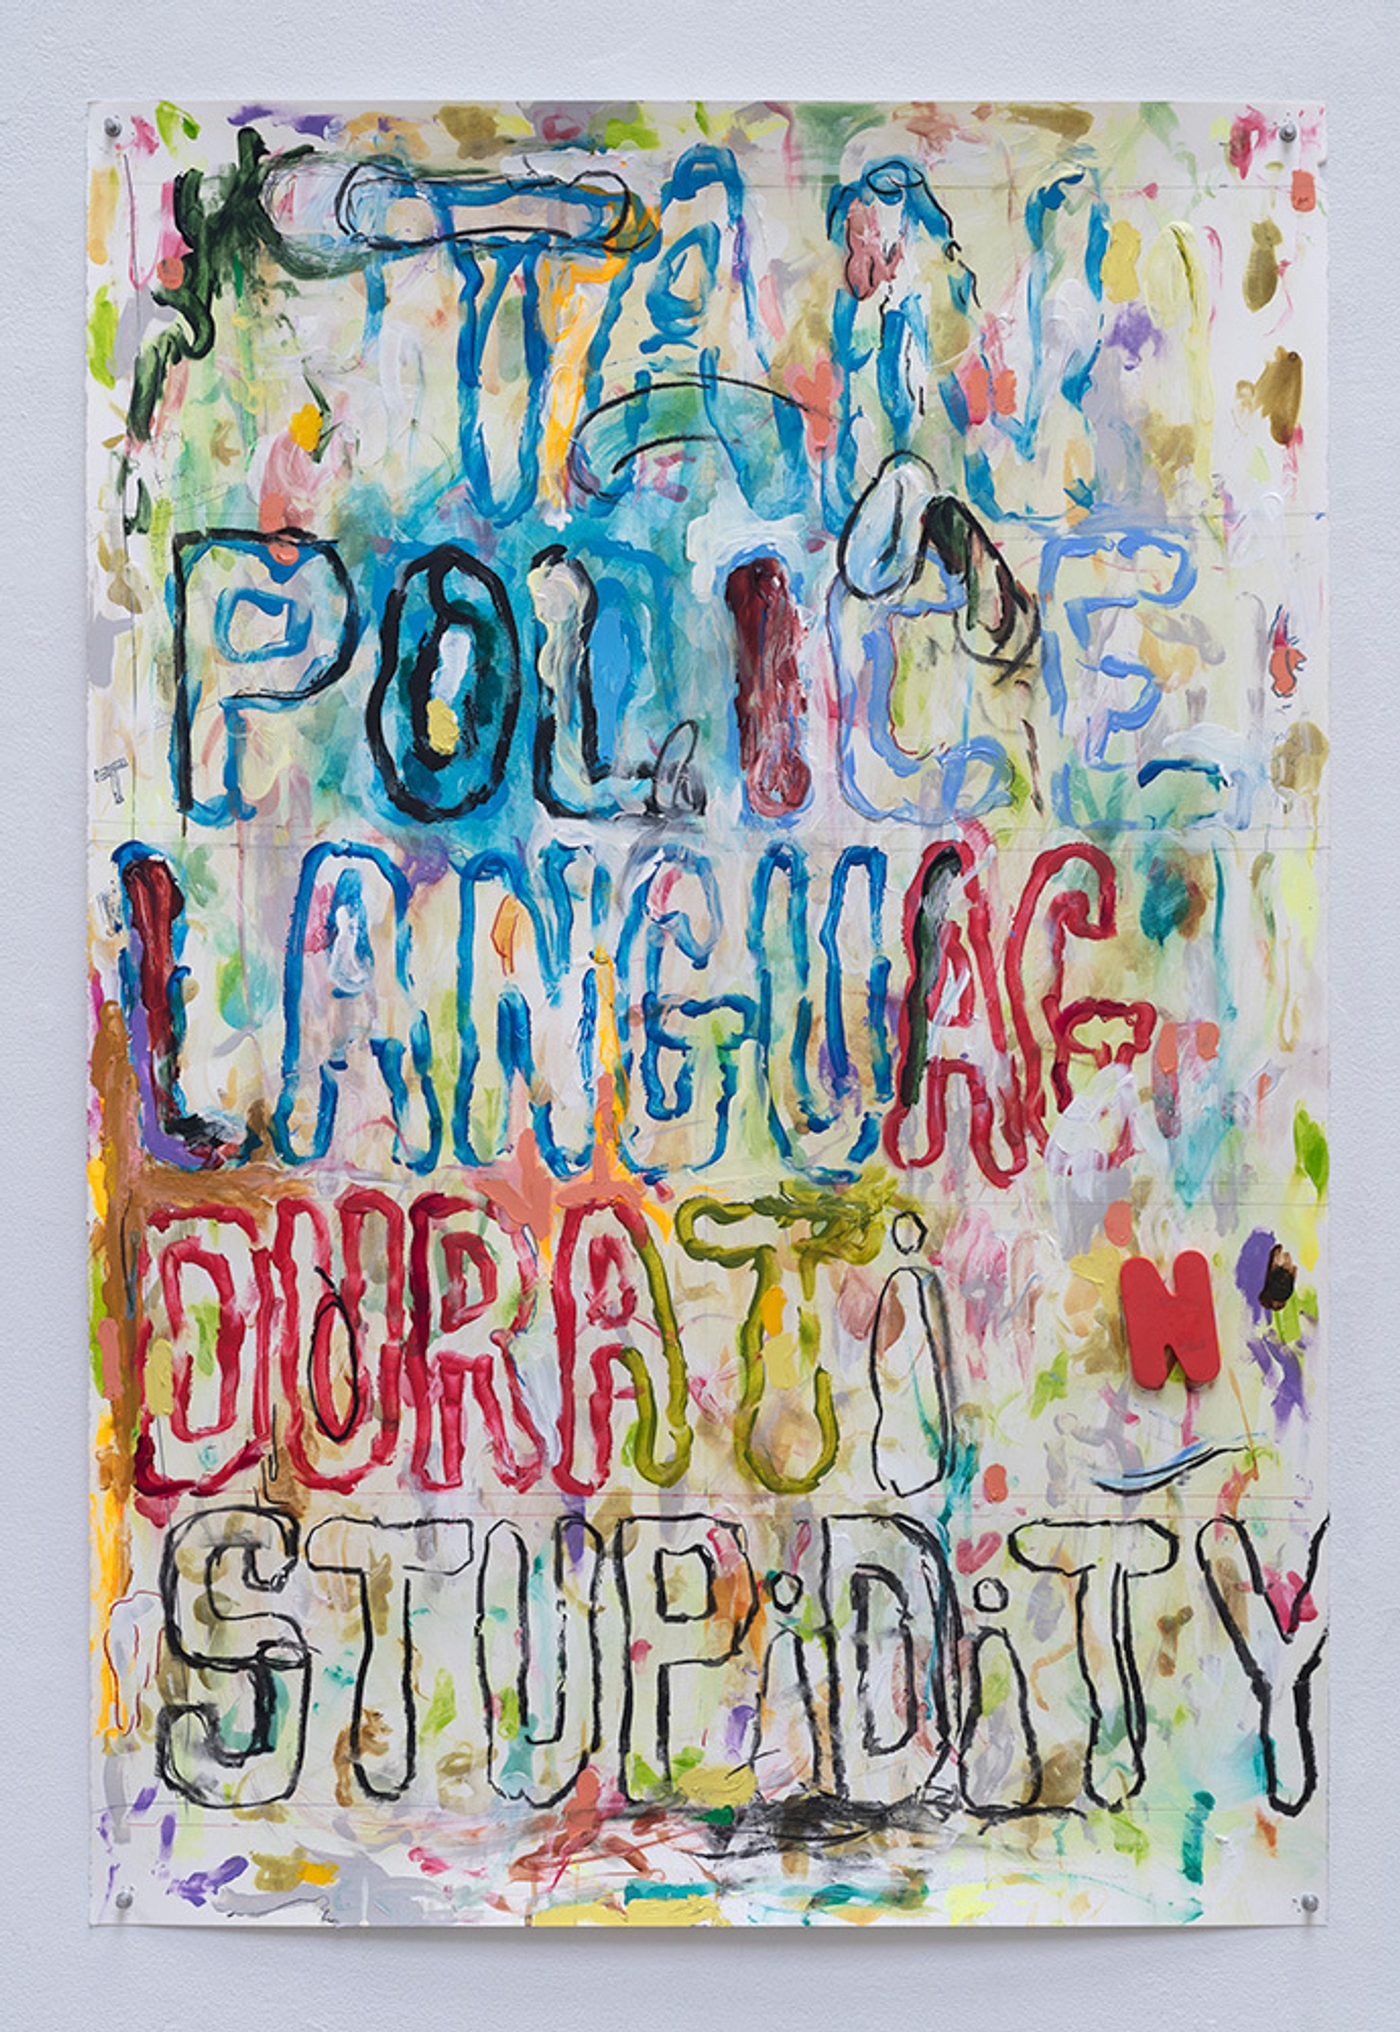 Pope.L 
<em>Tan Police</em> <br>
2018-19 <br>
Acrylic, oil, charcoal, coffee, ballpoint ink, graphite, foam letter and push pins on paper <br>
44 by 30 in. 111.8 by 76.2 cm. <br>
© Pope.L <br>
Courtesy of the artist and Mitchell-Innes & Nash, New York (4/10)